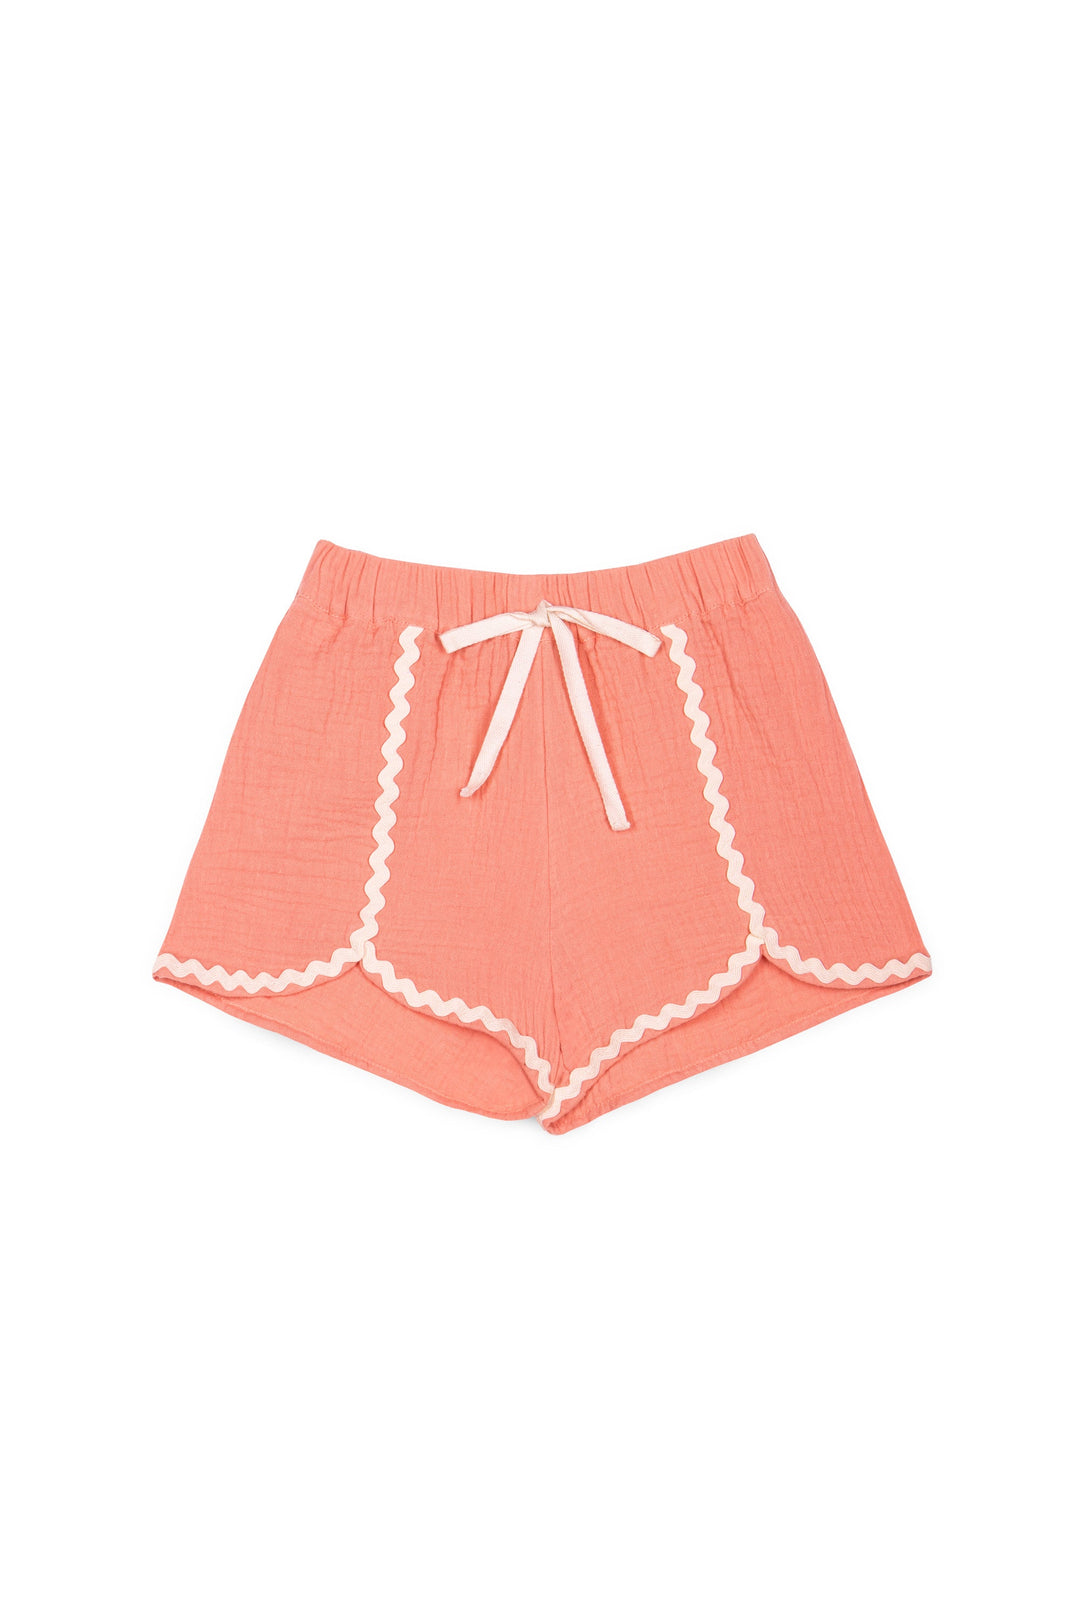 Short Anette Muslin Coral